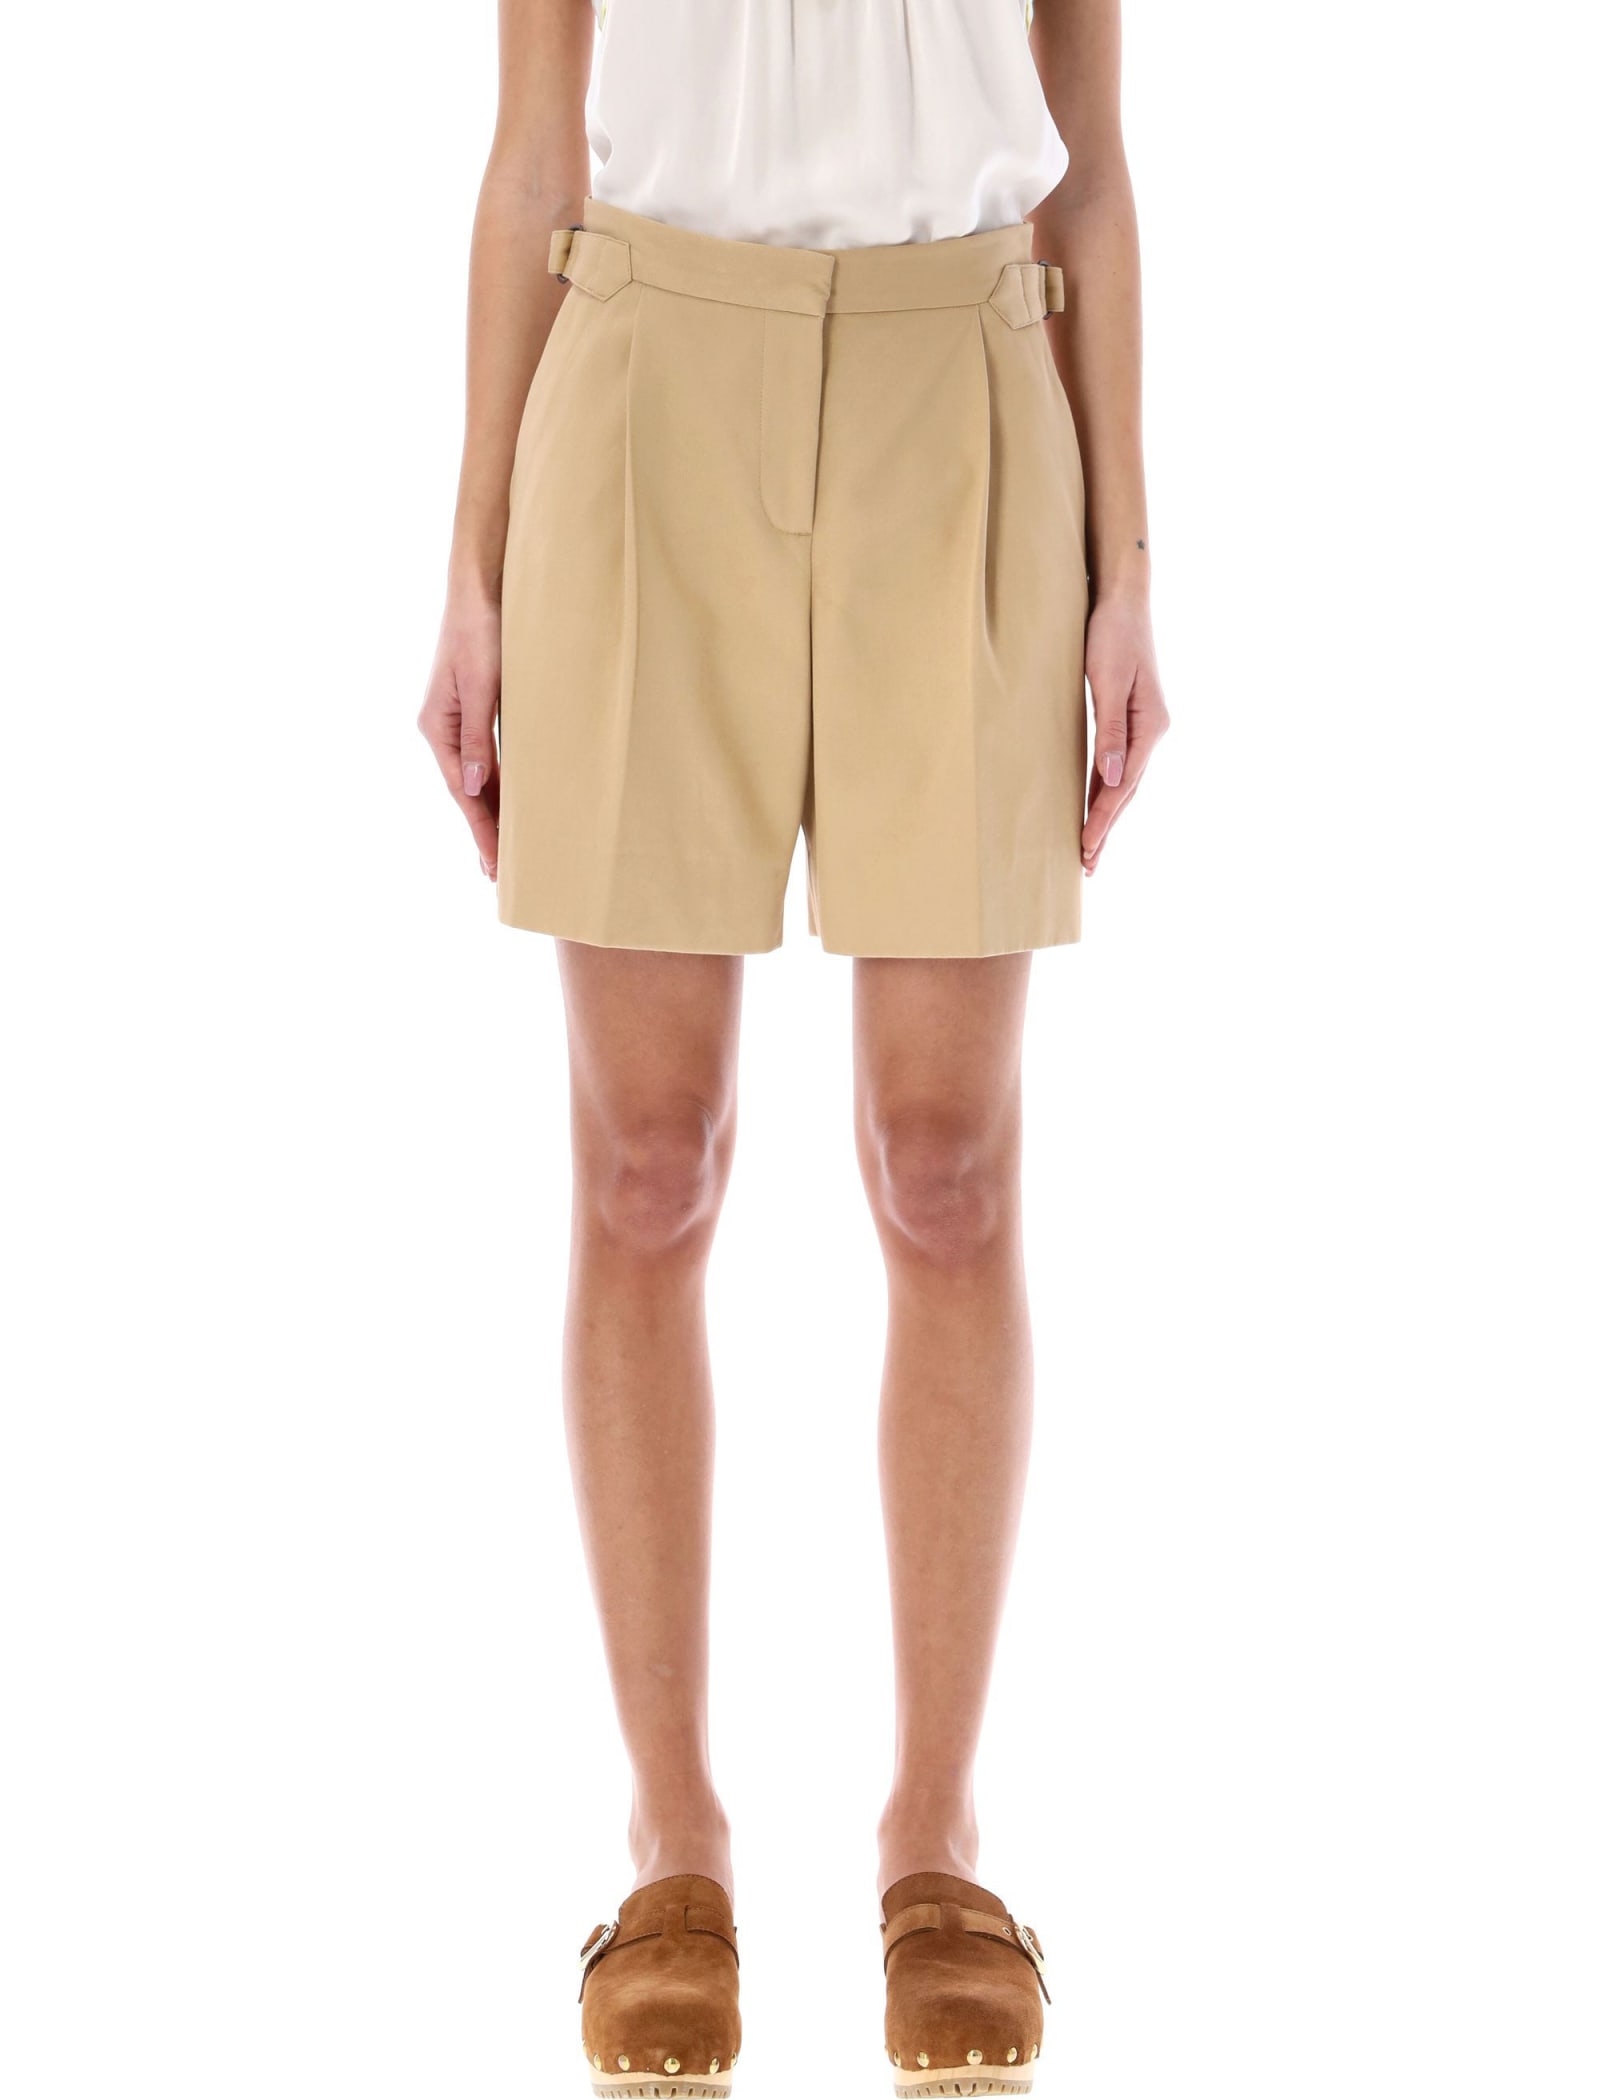 SEE BY CHLOÉ PLEATED BERMUDA SHORTS